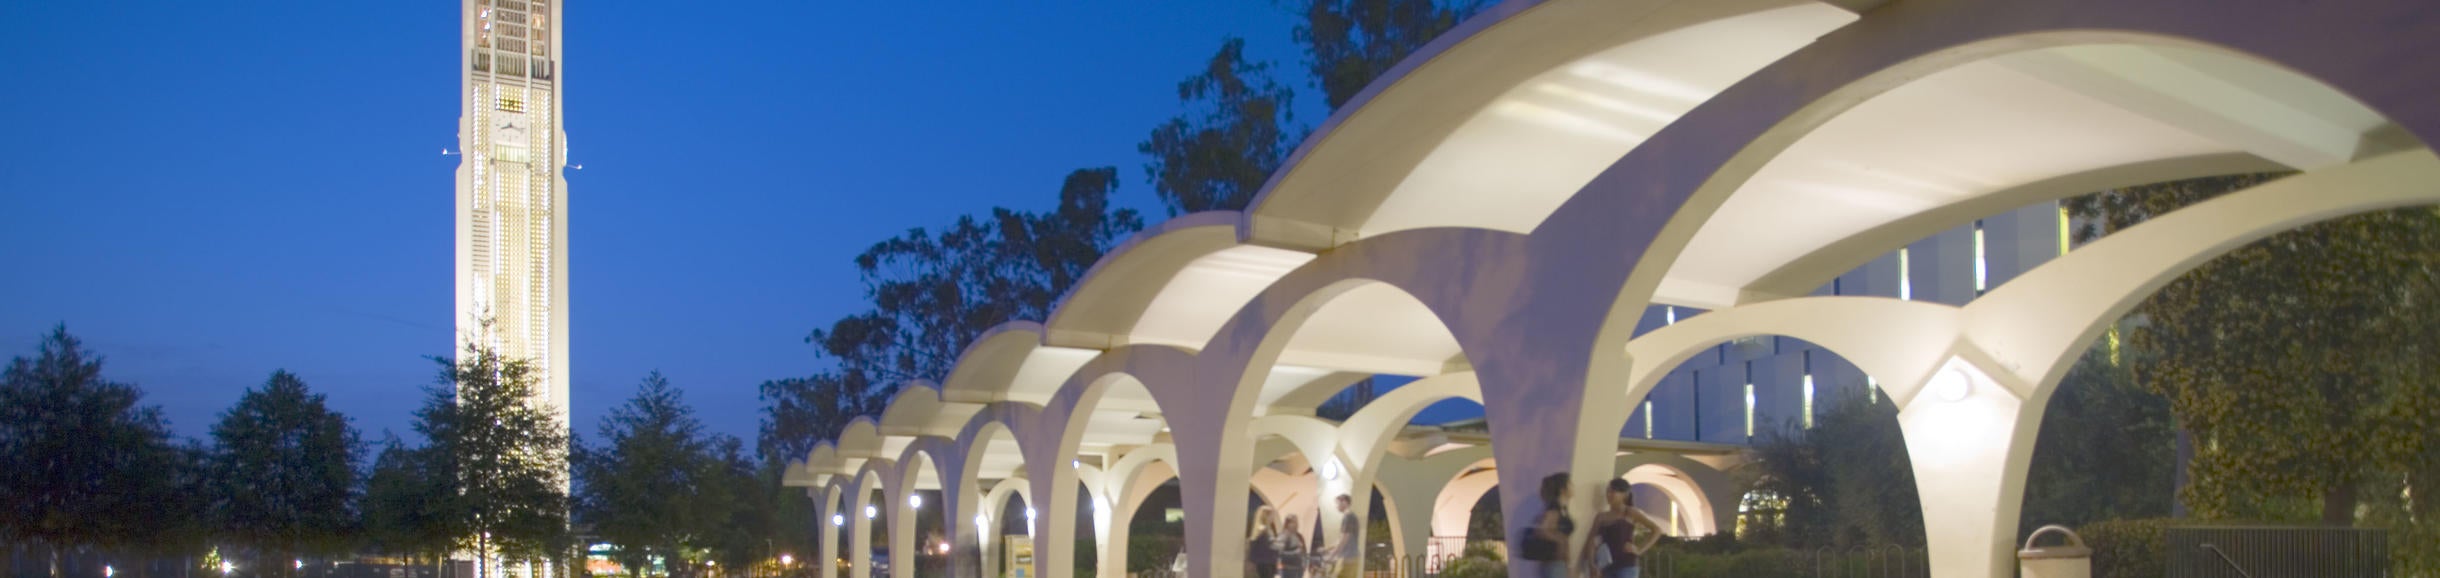 UCR Belltower and Rivera Library arches